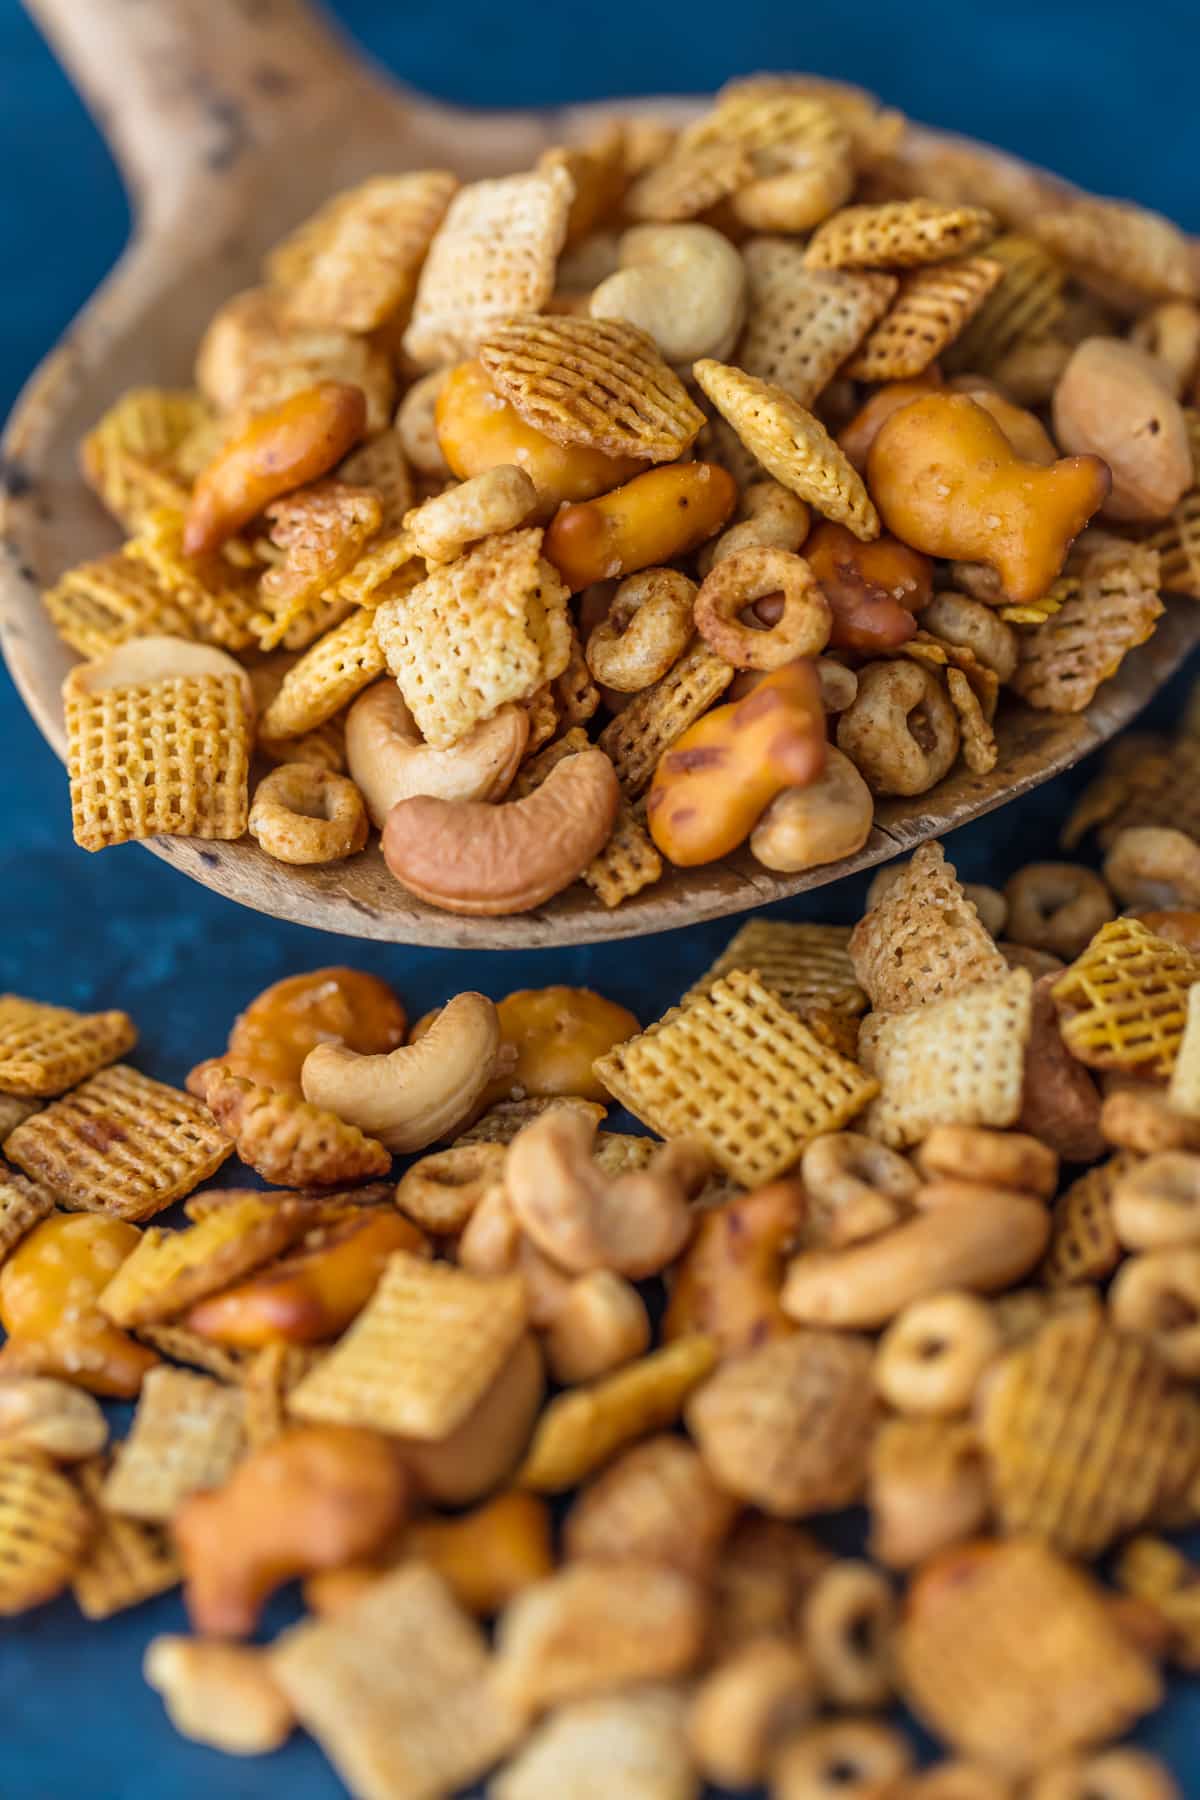 Chex Party Mix is a recipe my Mom has been making since I was a little kid. It's our family's favorite Chex Mix Recipe! It doesn't get better than this mix of cereal, nuts, pretzels, and all that spice! A little bit sweet and little bit spicy. This BEST EVER Chex Party Mix Recipe is perfect for Christmas, tailgating, Summer BBQs, and every day in between. SO ADDICTING!